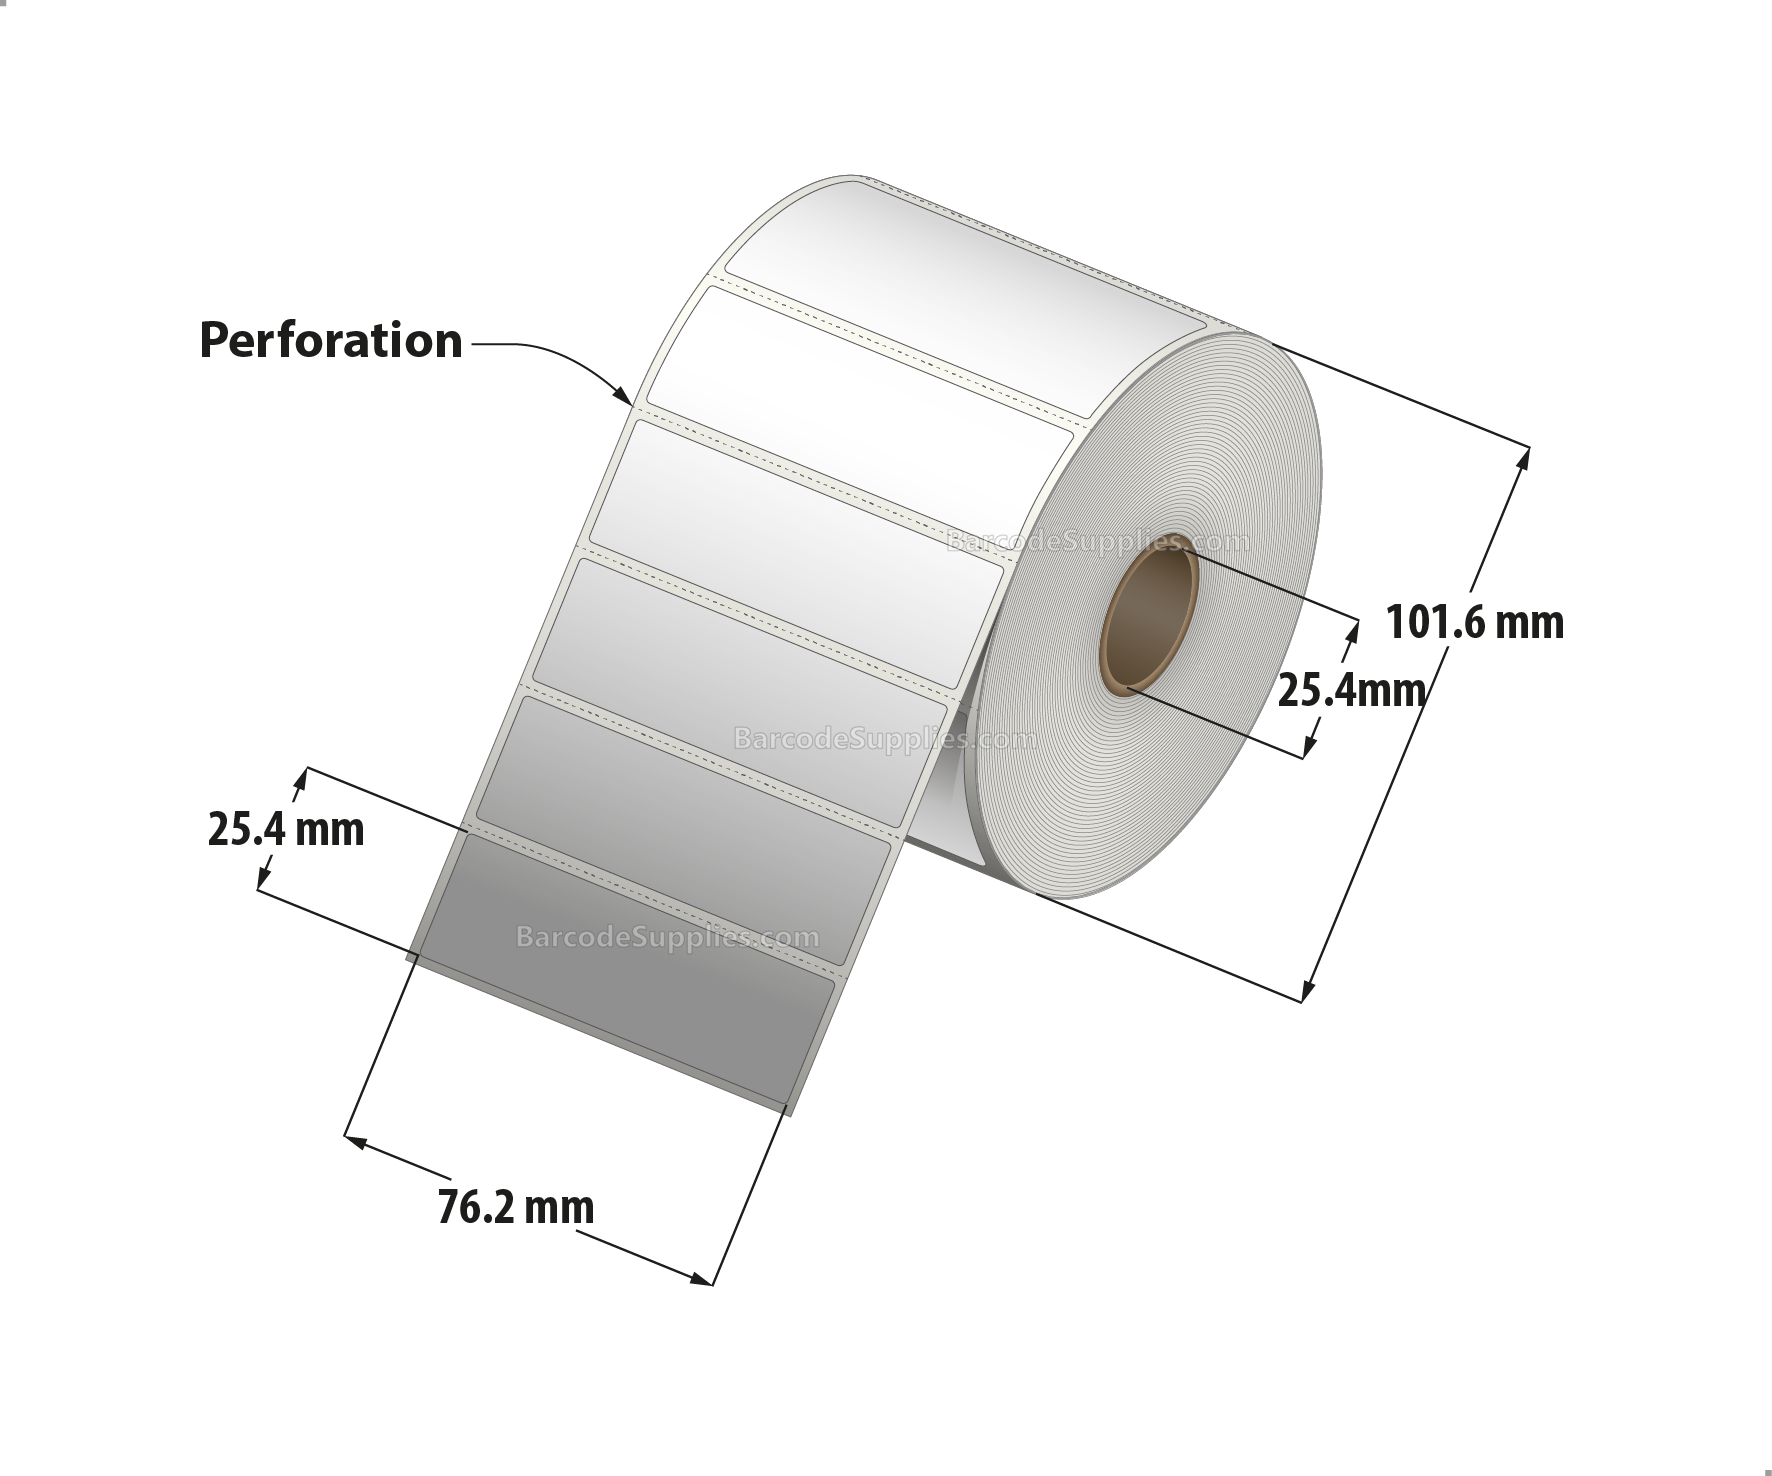 3 x 1 Direct Thermal White Labels With Rubber Adhesive - Perforated - 1310 Labels Per Roll - Carton Of 12 Rolls - 15720 Labels Total - MPN: RDT4-300100-1P